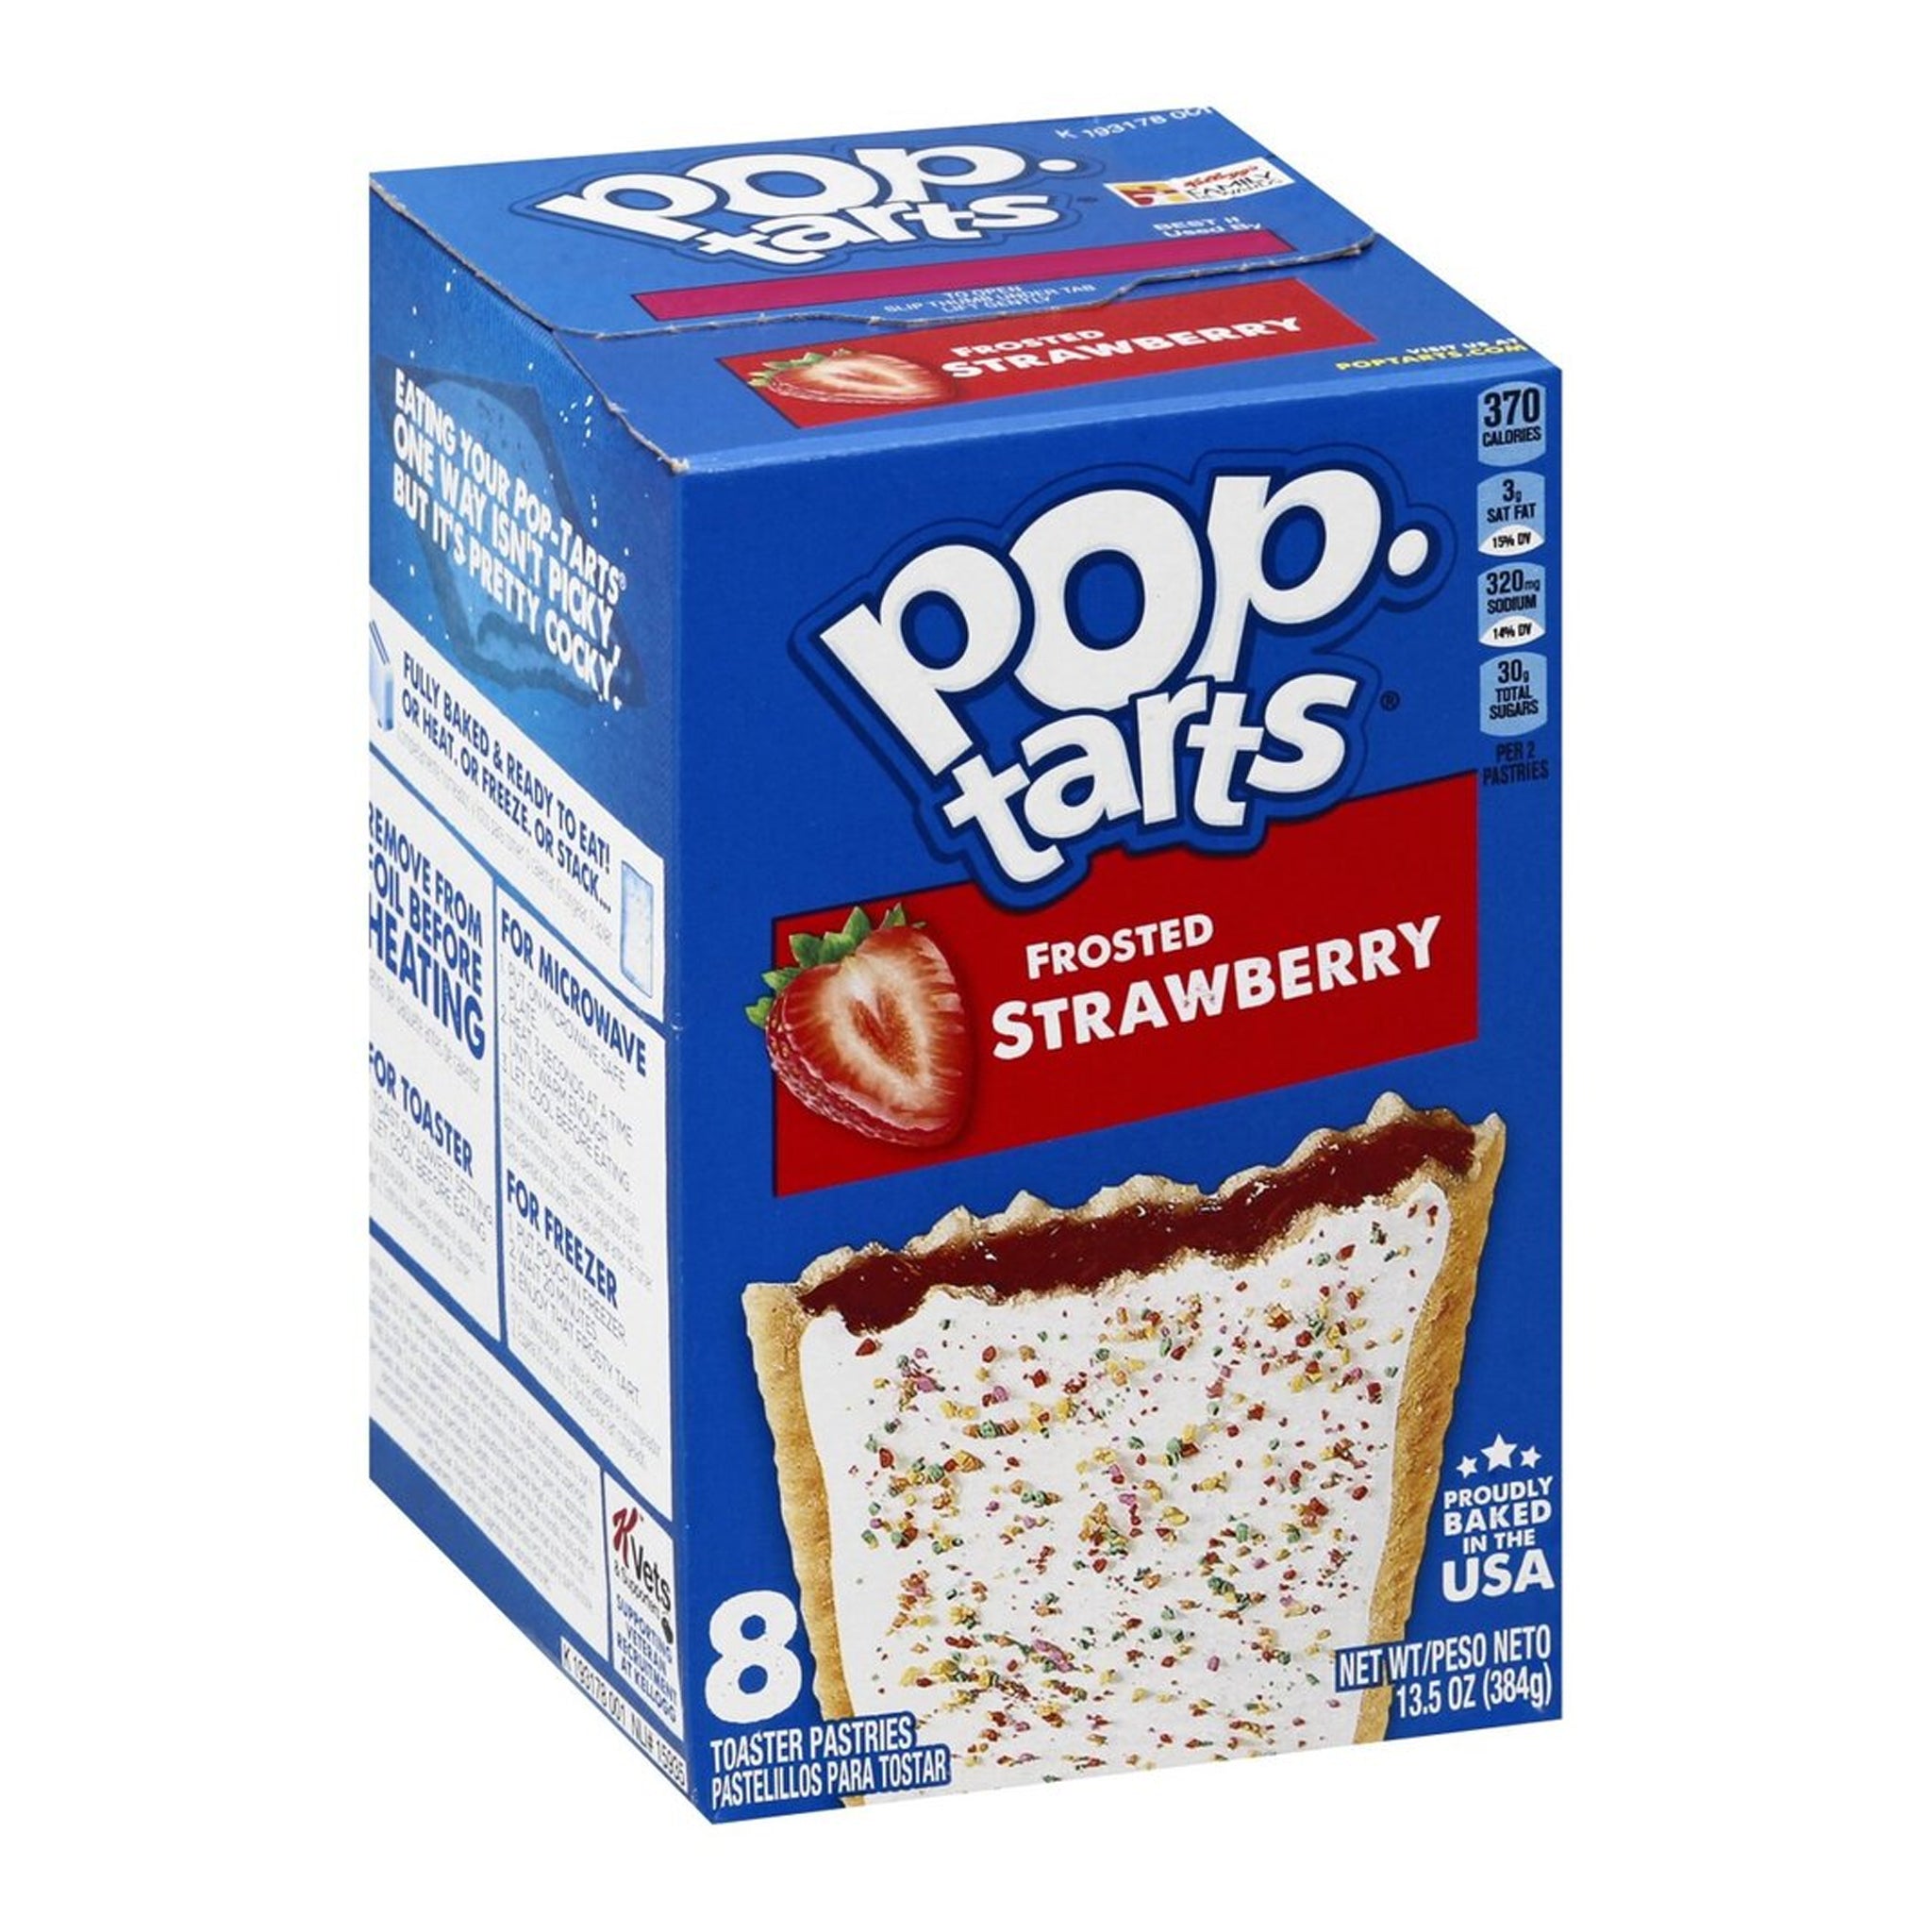 Pop Tarts Frosted Strawberry Frosted - פופטארטס קרם תות